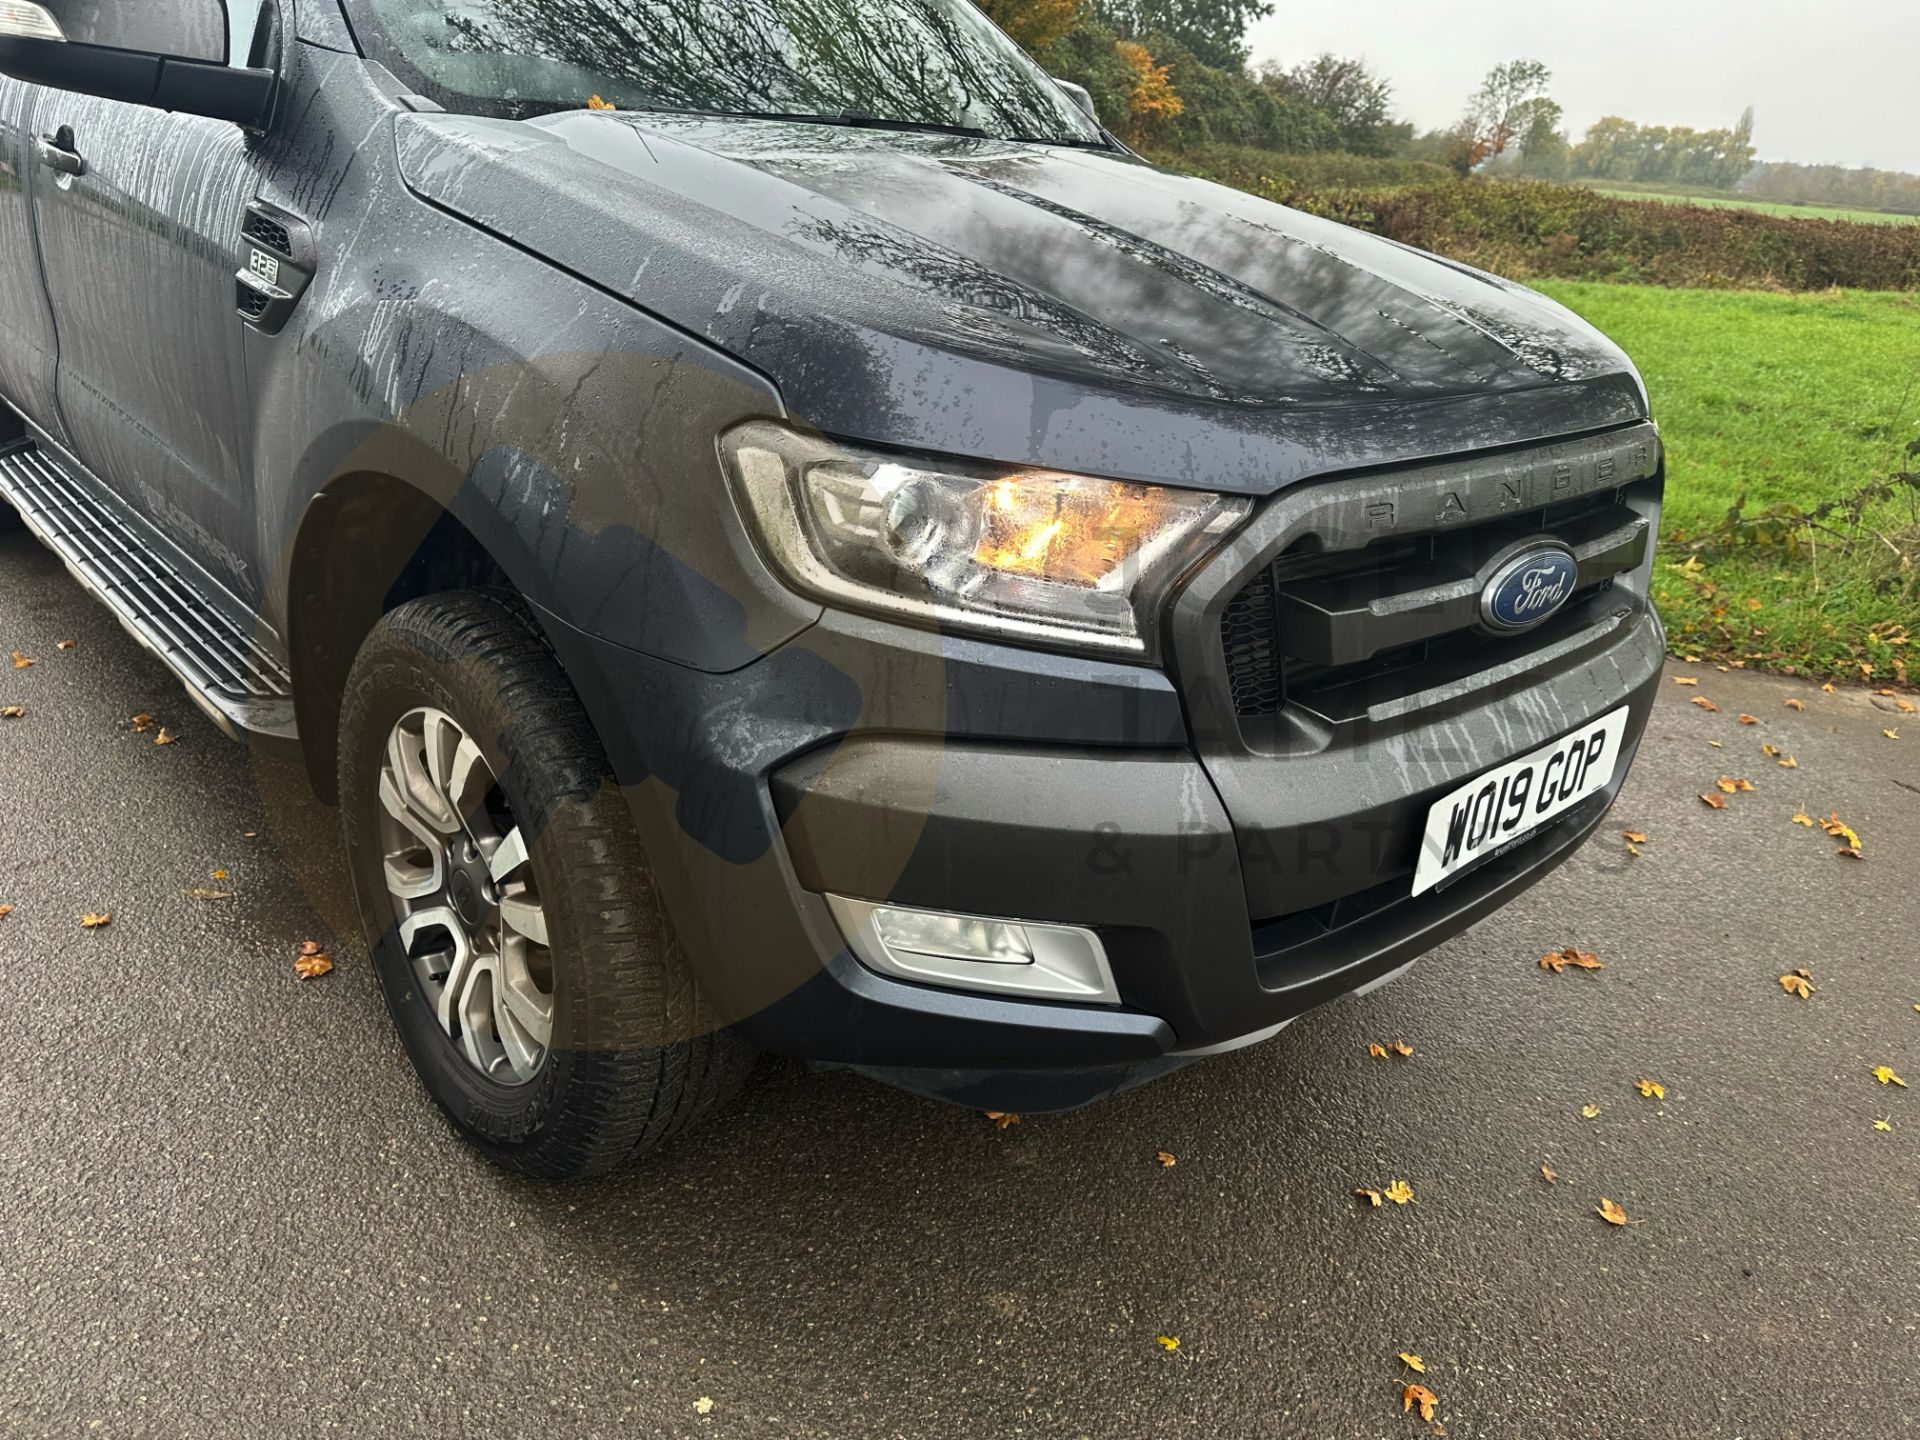 FORD RANGER *WILDTRAK EDITION* DOUBLE CAB PICK-UP (2019 - EURO 6) 3.2 TDCI - AUTOMATIC (1 OWNER) - Image 18 of 52